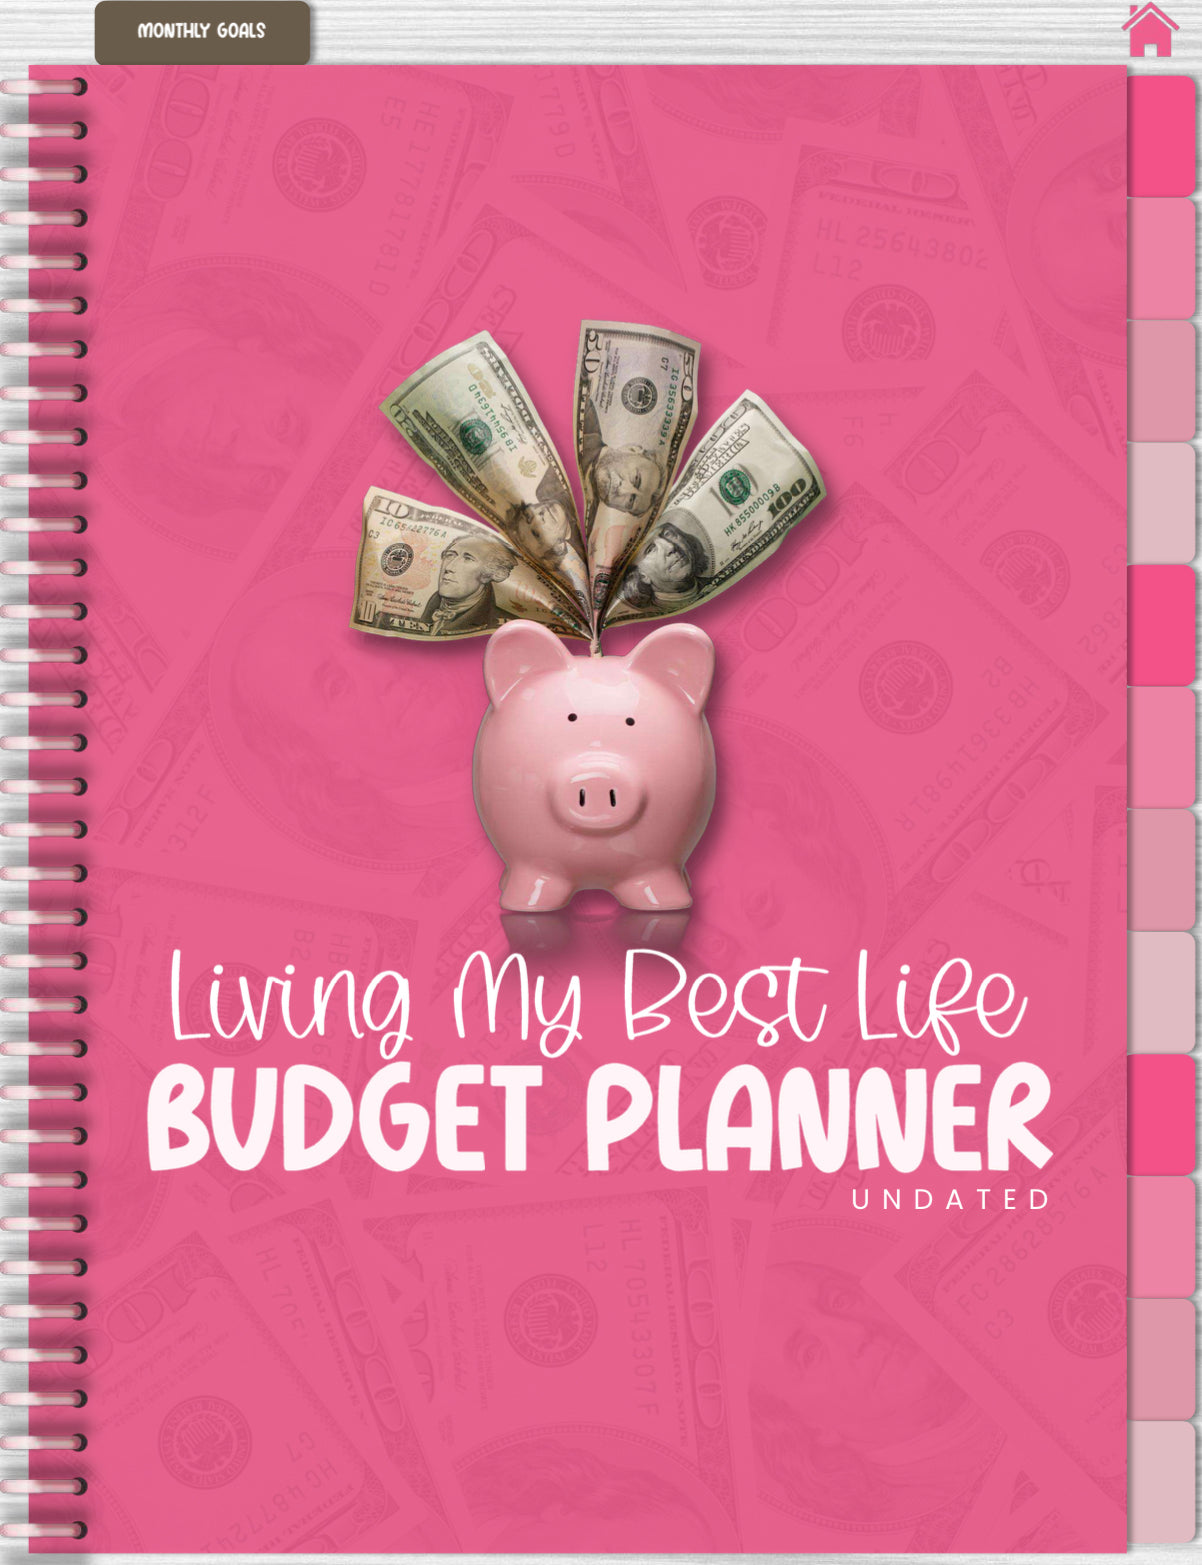 My Favorite Planner Products 2021 - Beginner to Advanced!